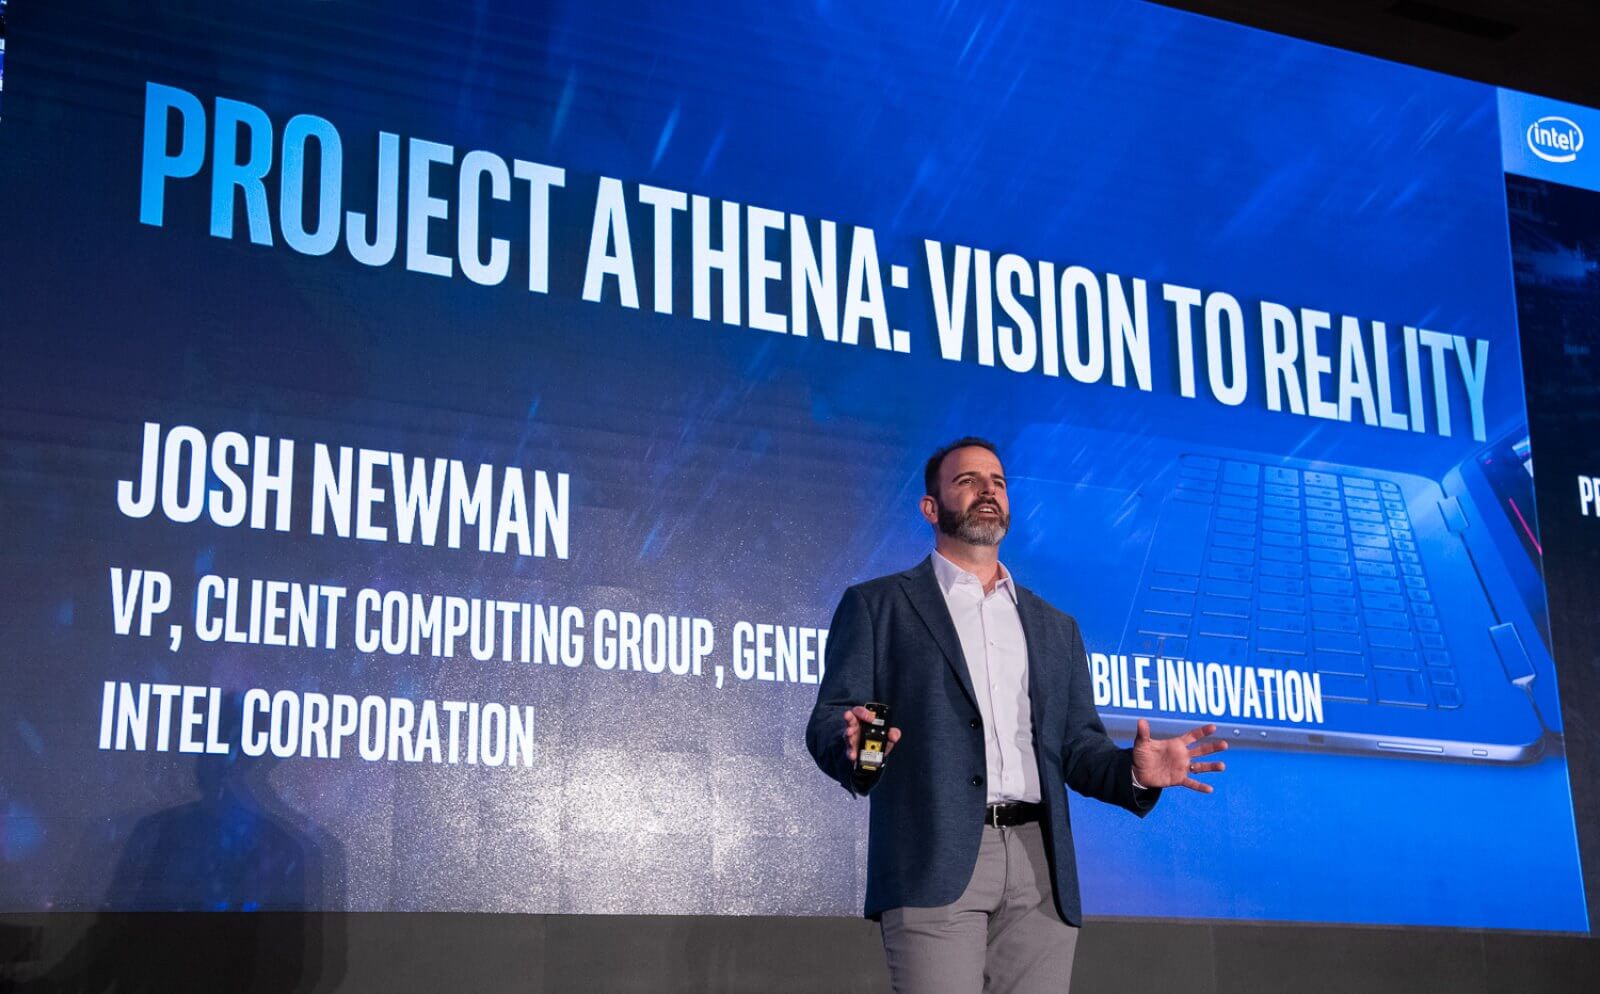 Intel introduces 'Engineered for Mobile Performance' label for Project Athena laptops